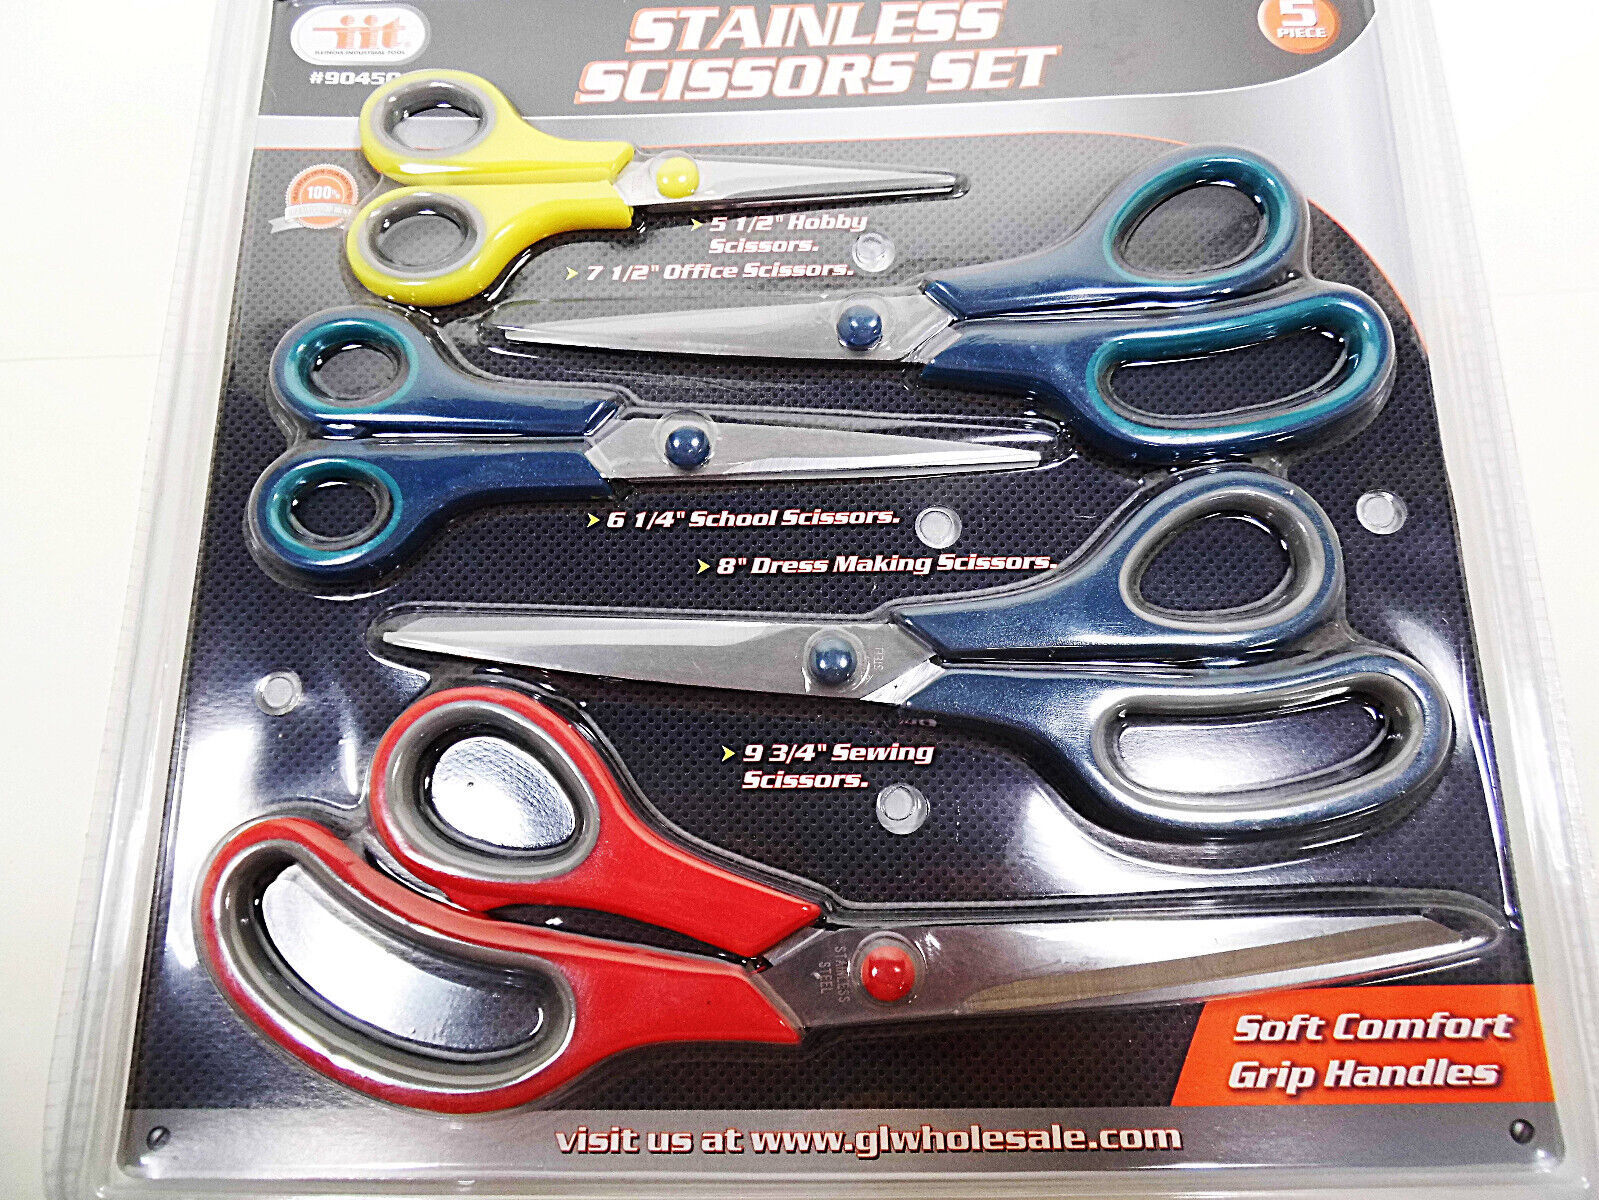 Primary image for Lot of 6 Stainless Steel Scissors 5pc Sets Set Hobby Sewing Scissor Comfort Grip